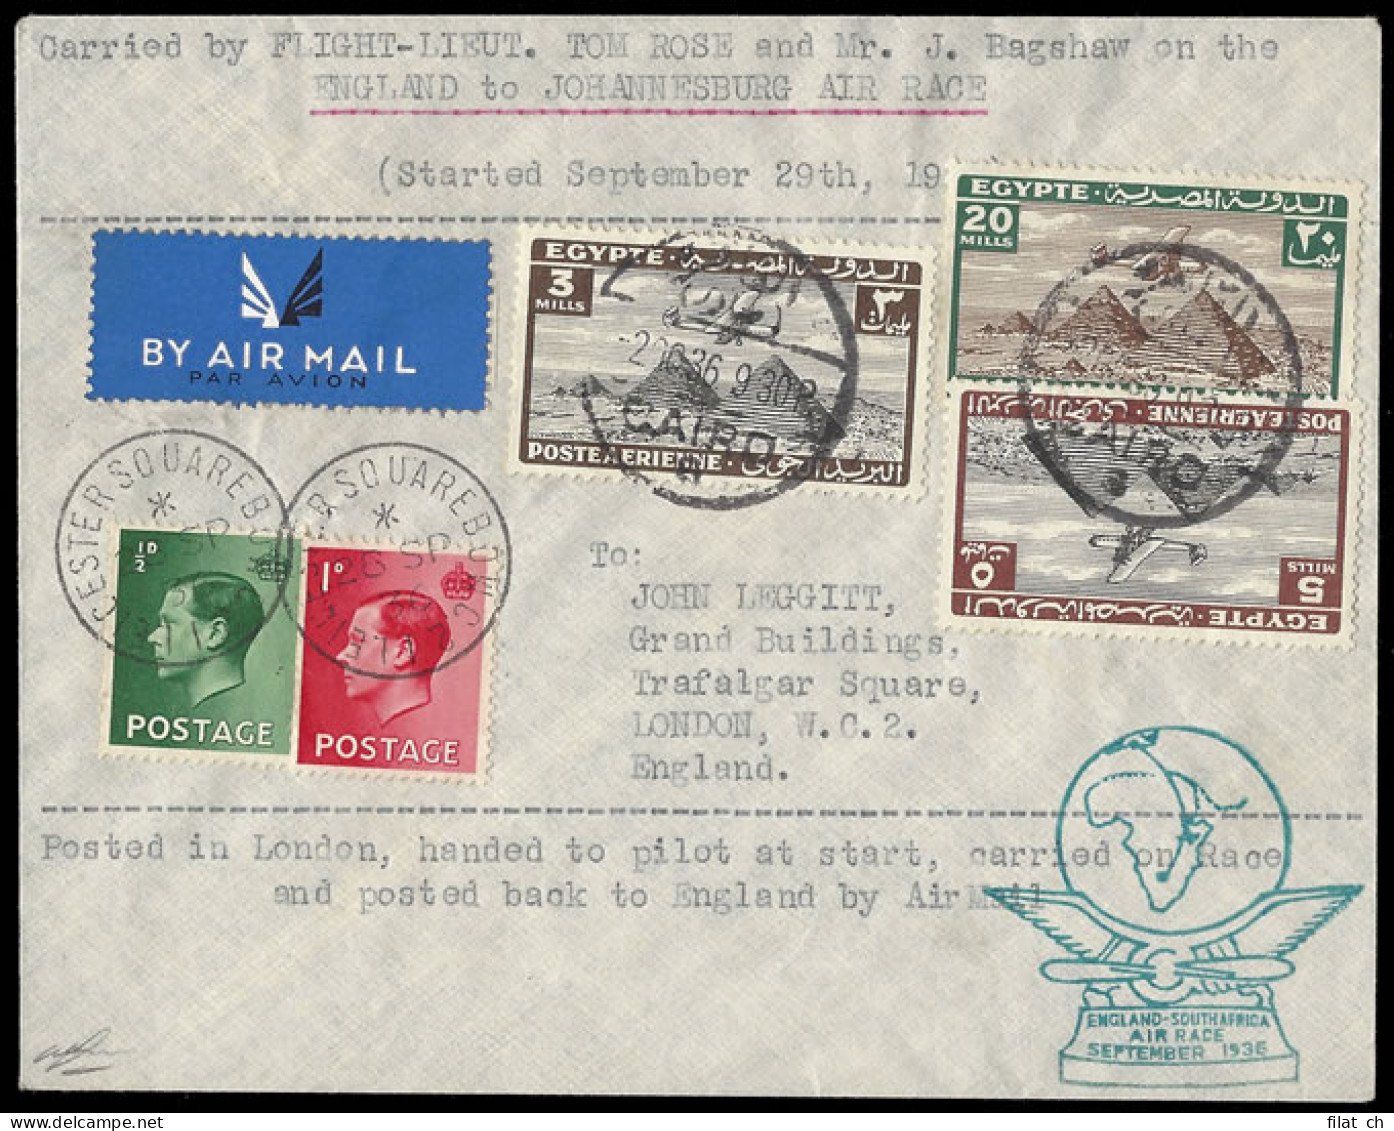 South Africa 1936 Schlesinger Air Race Rose & Bagshaw Signed - Luftpost